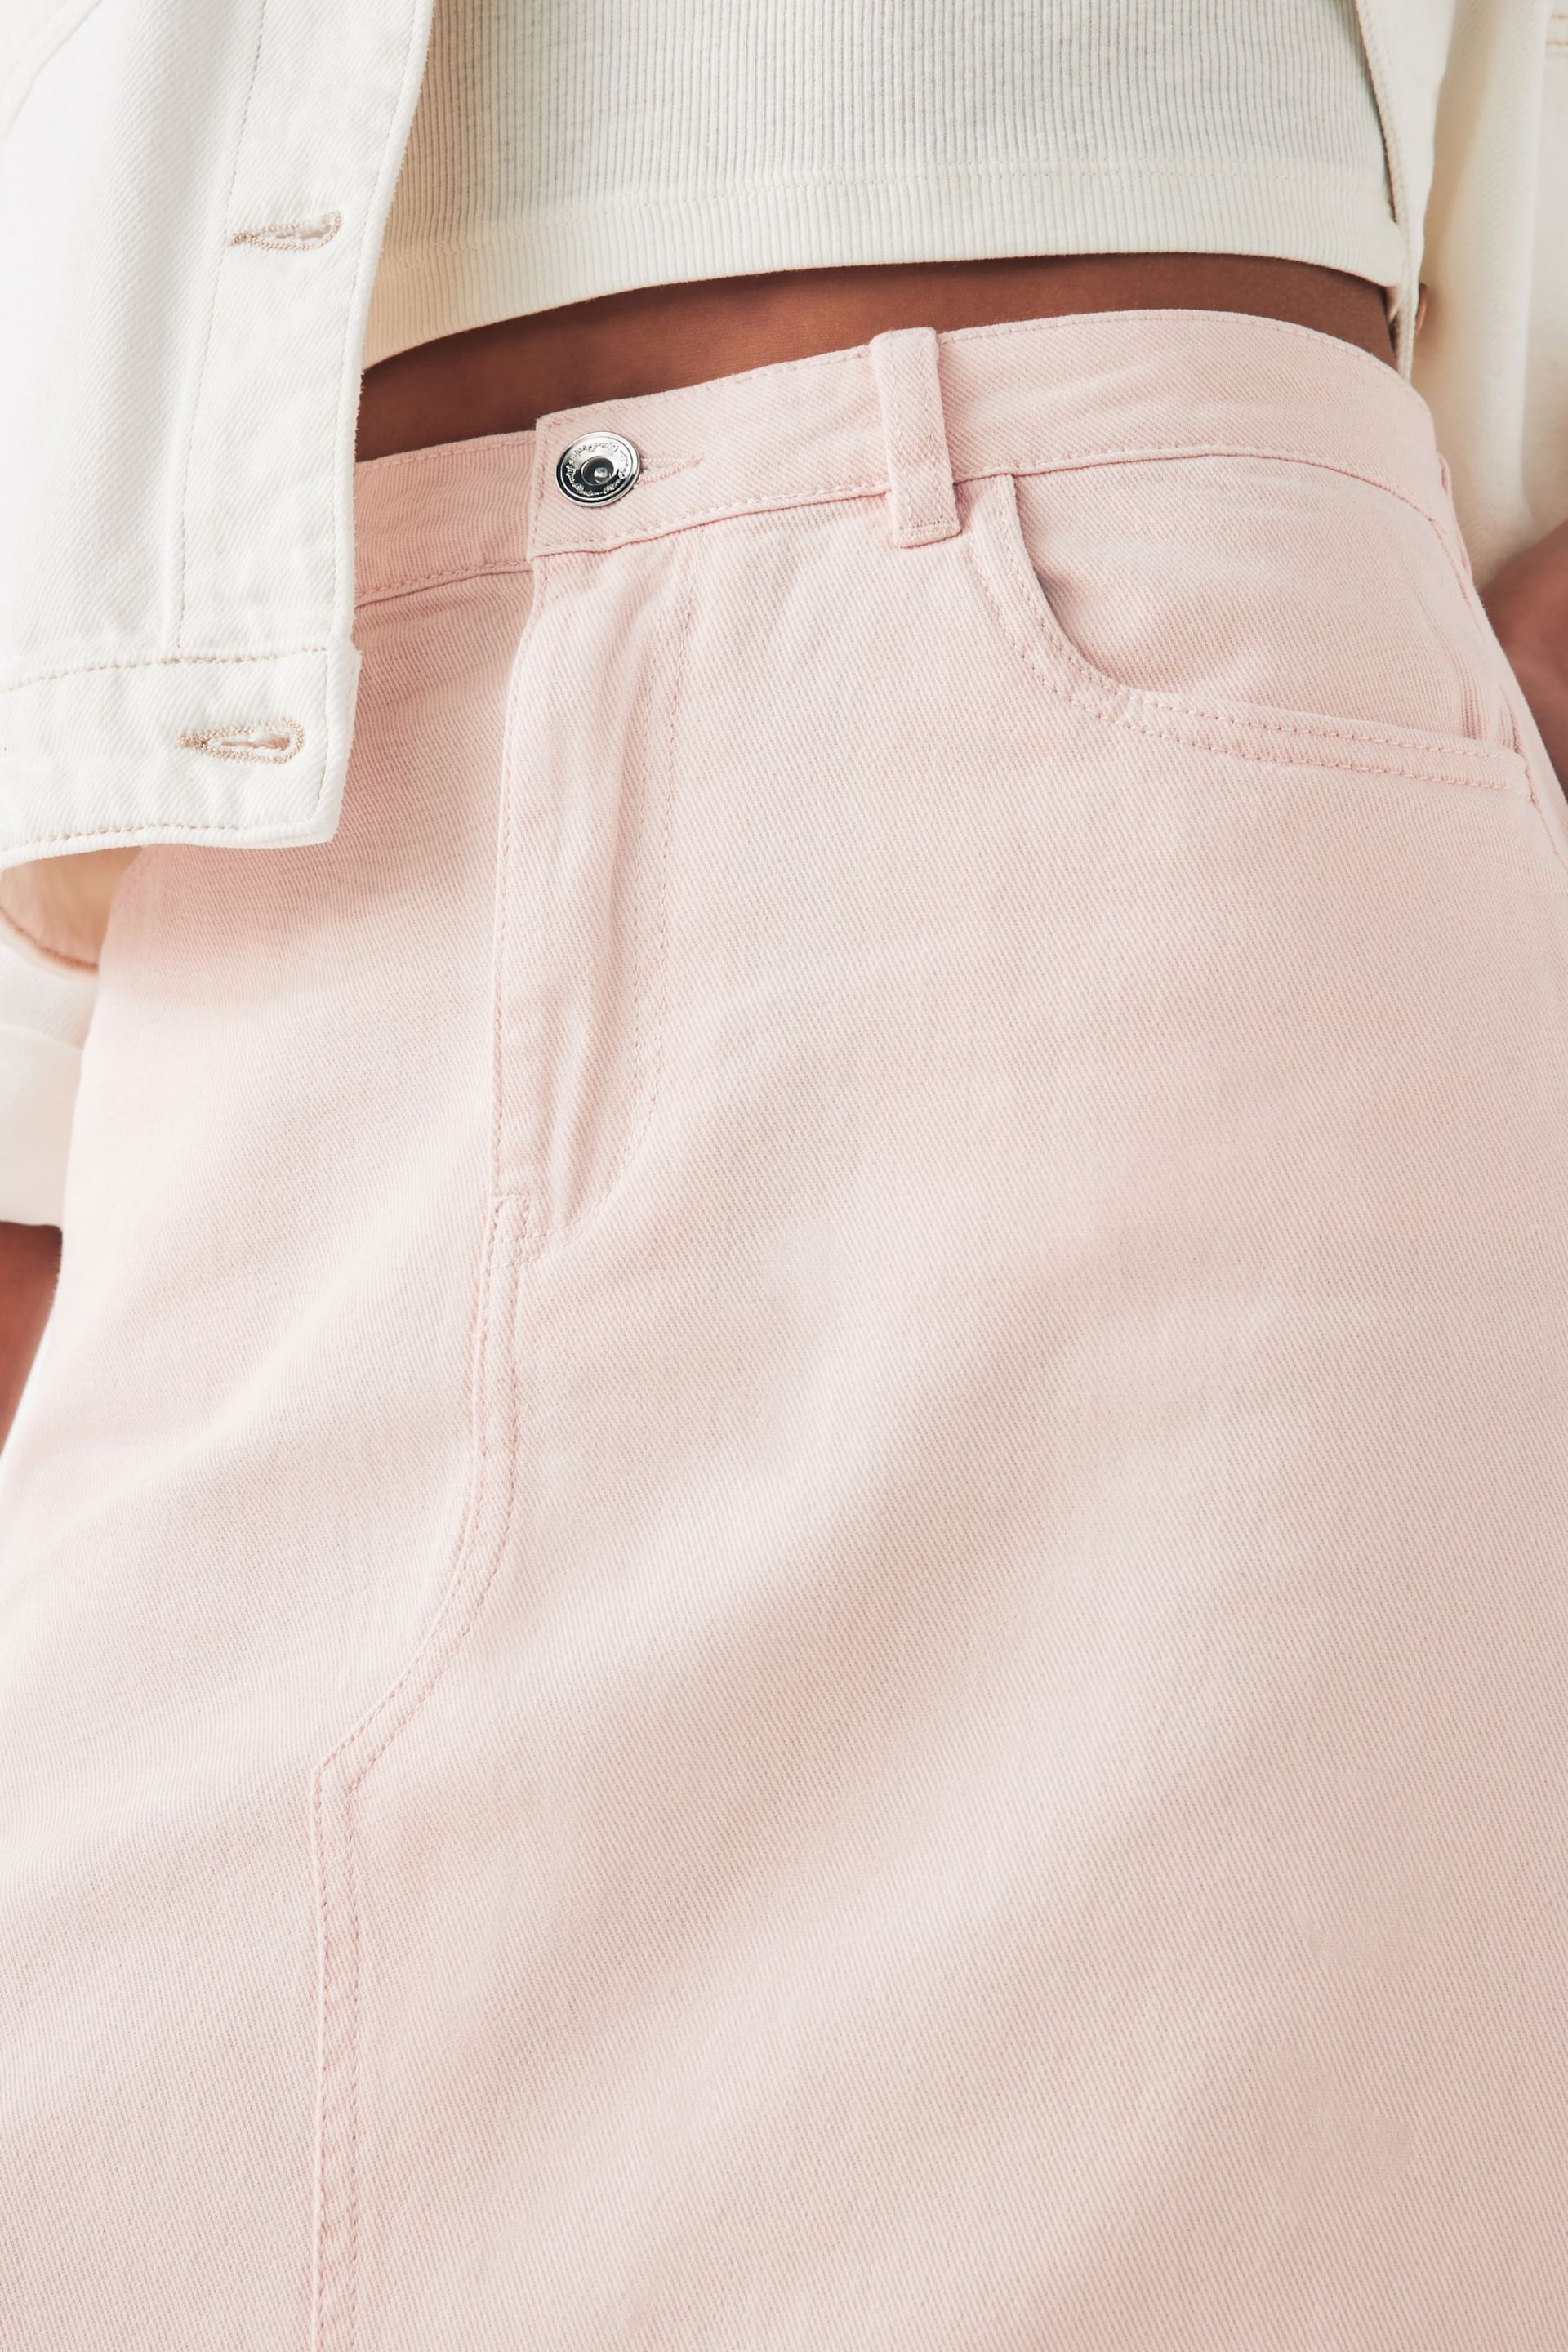 ONLY Pink Denim Midi Skirt With Front Split - Image 3 of 5